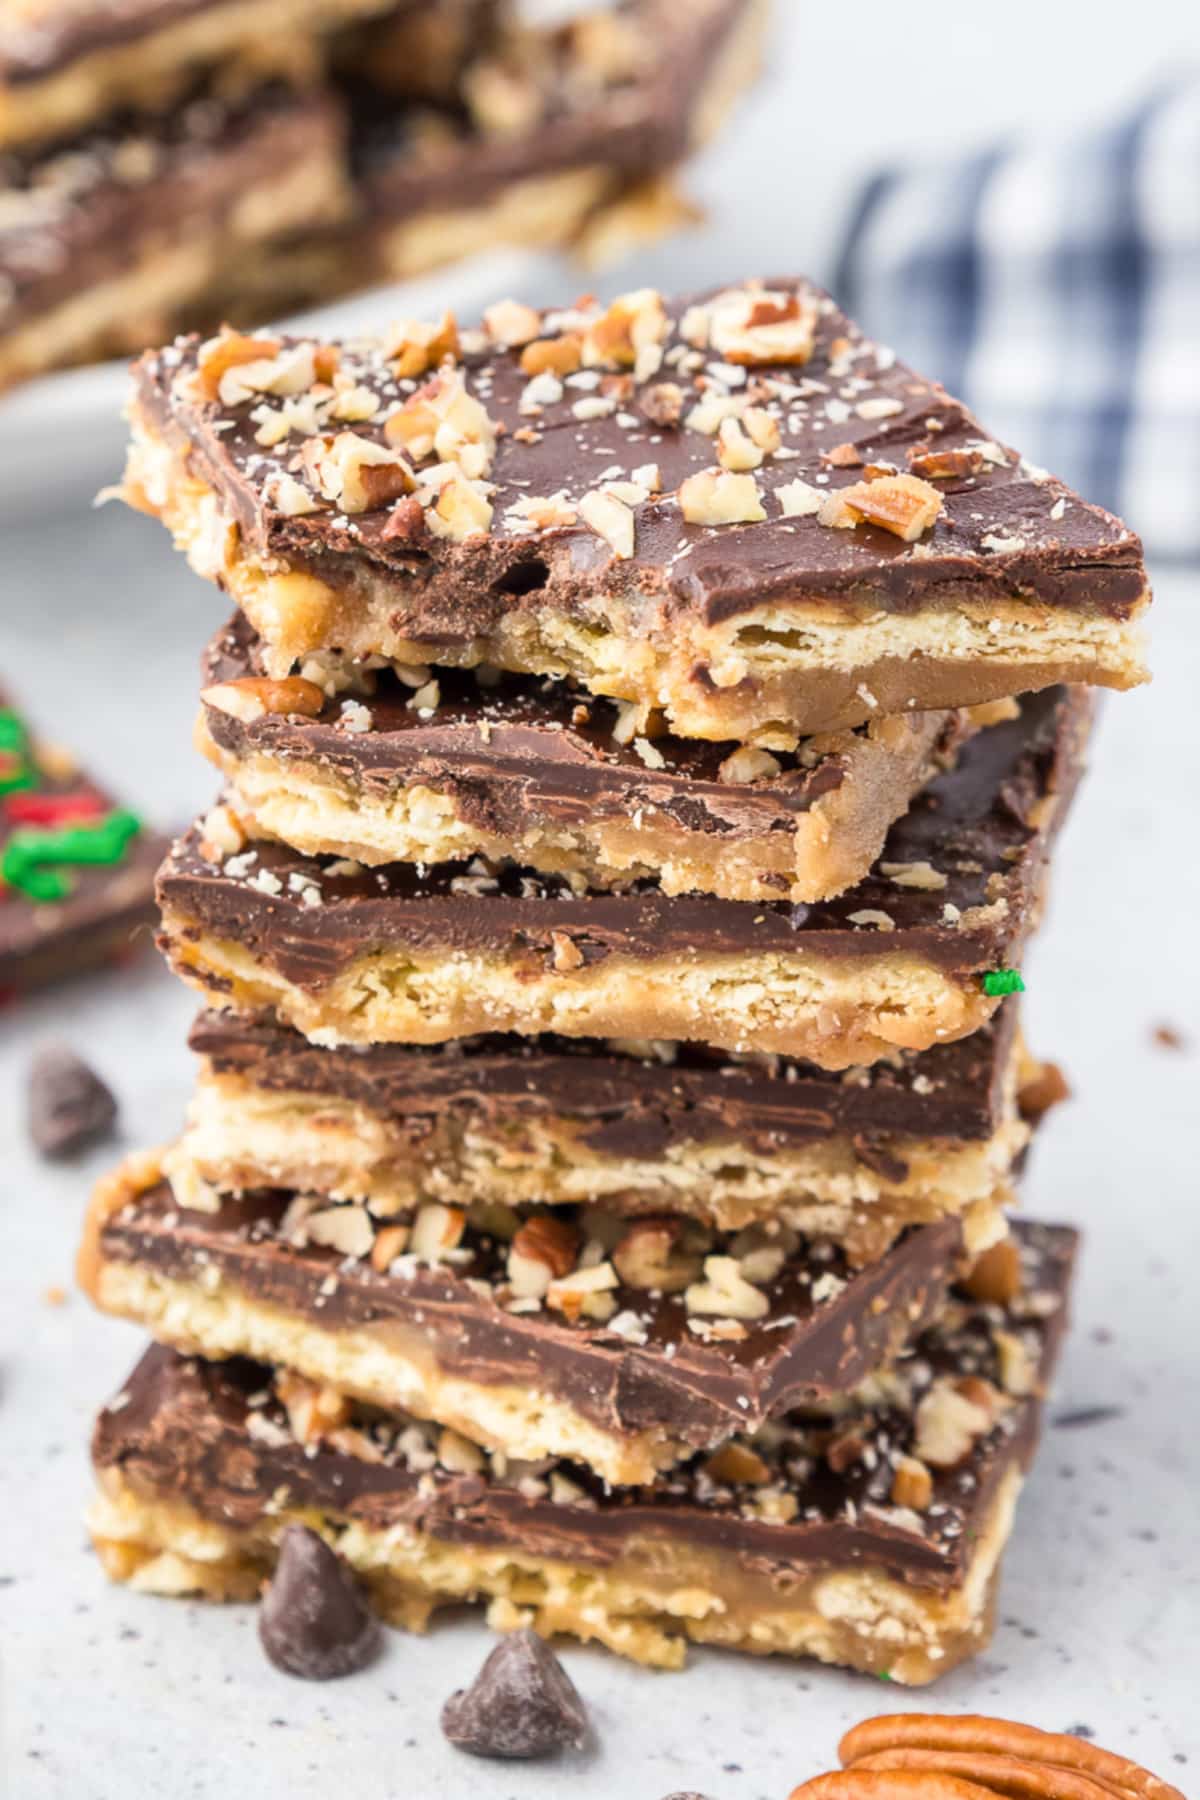 A stack of chocolate and pecan saltine toffee bars with the top piece missing a bite.